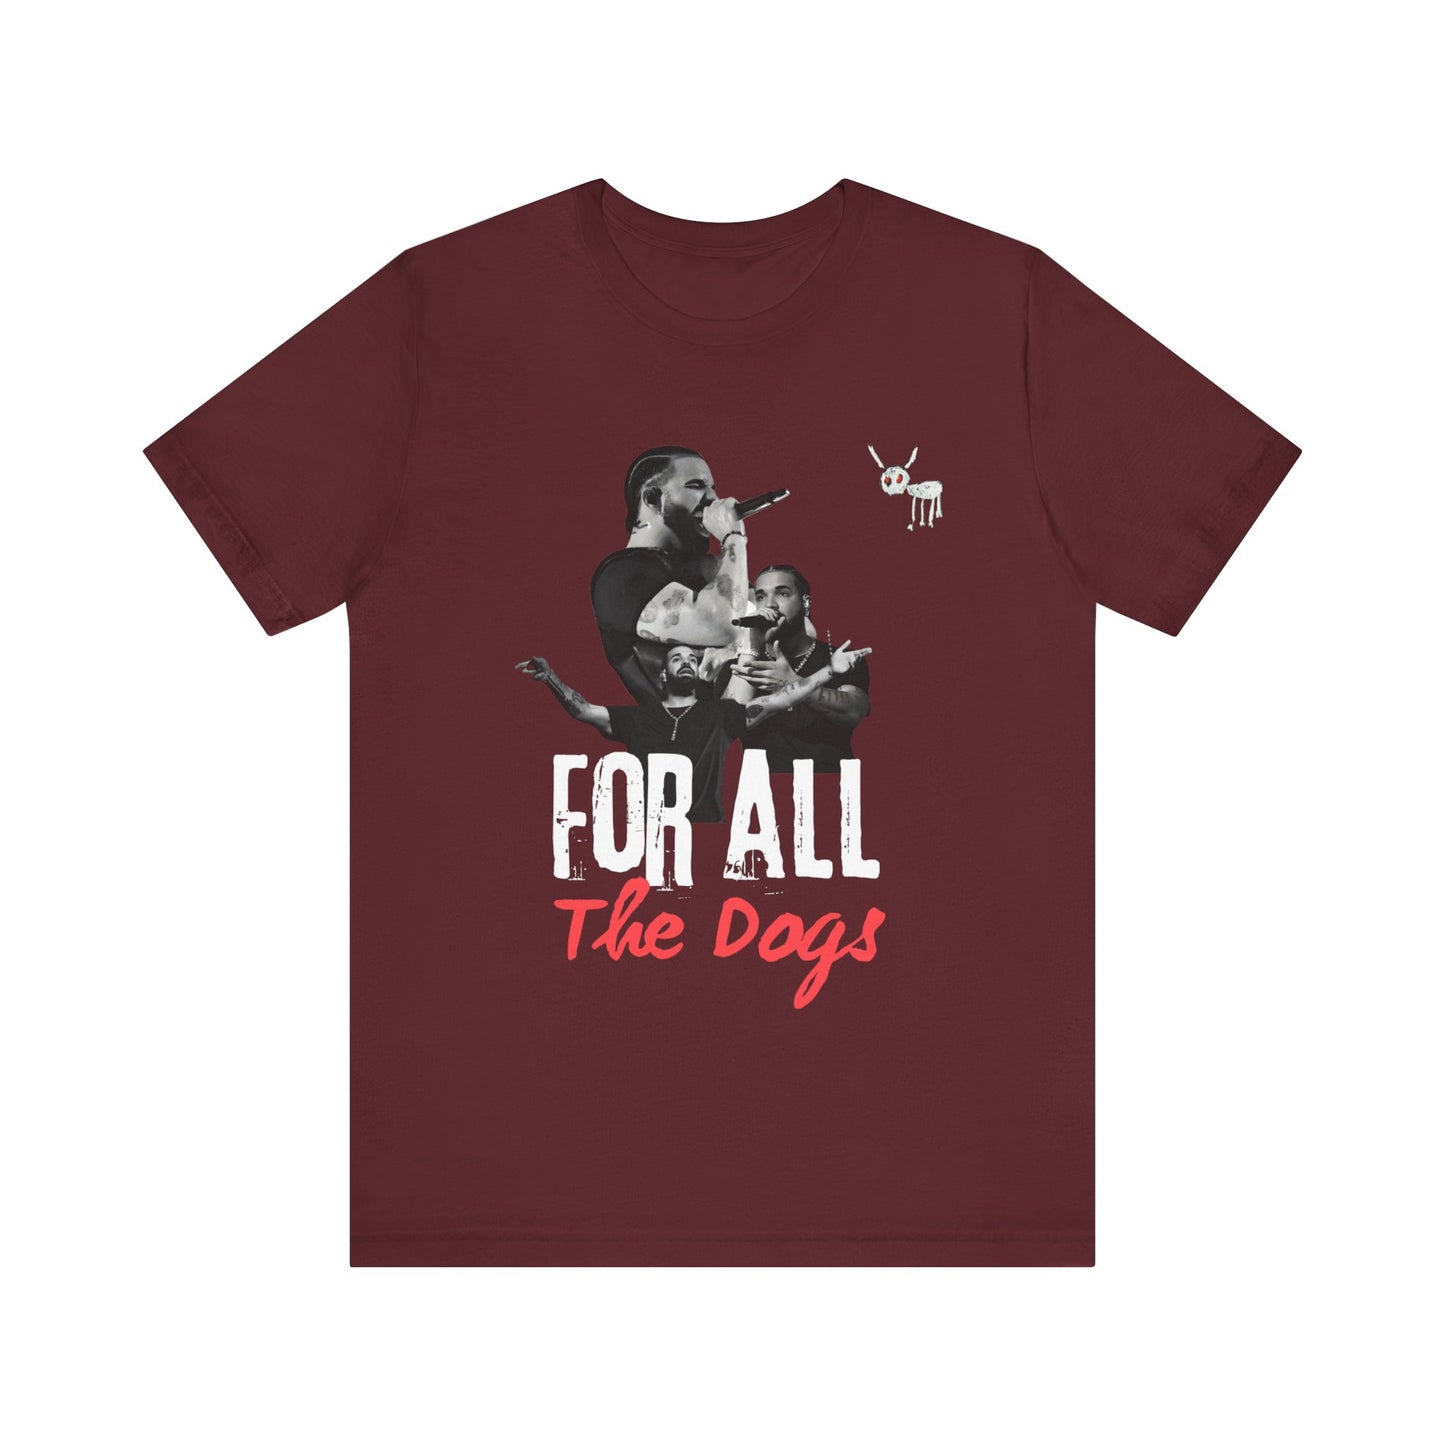 Drake “For All The Dogs” Tee